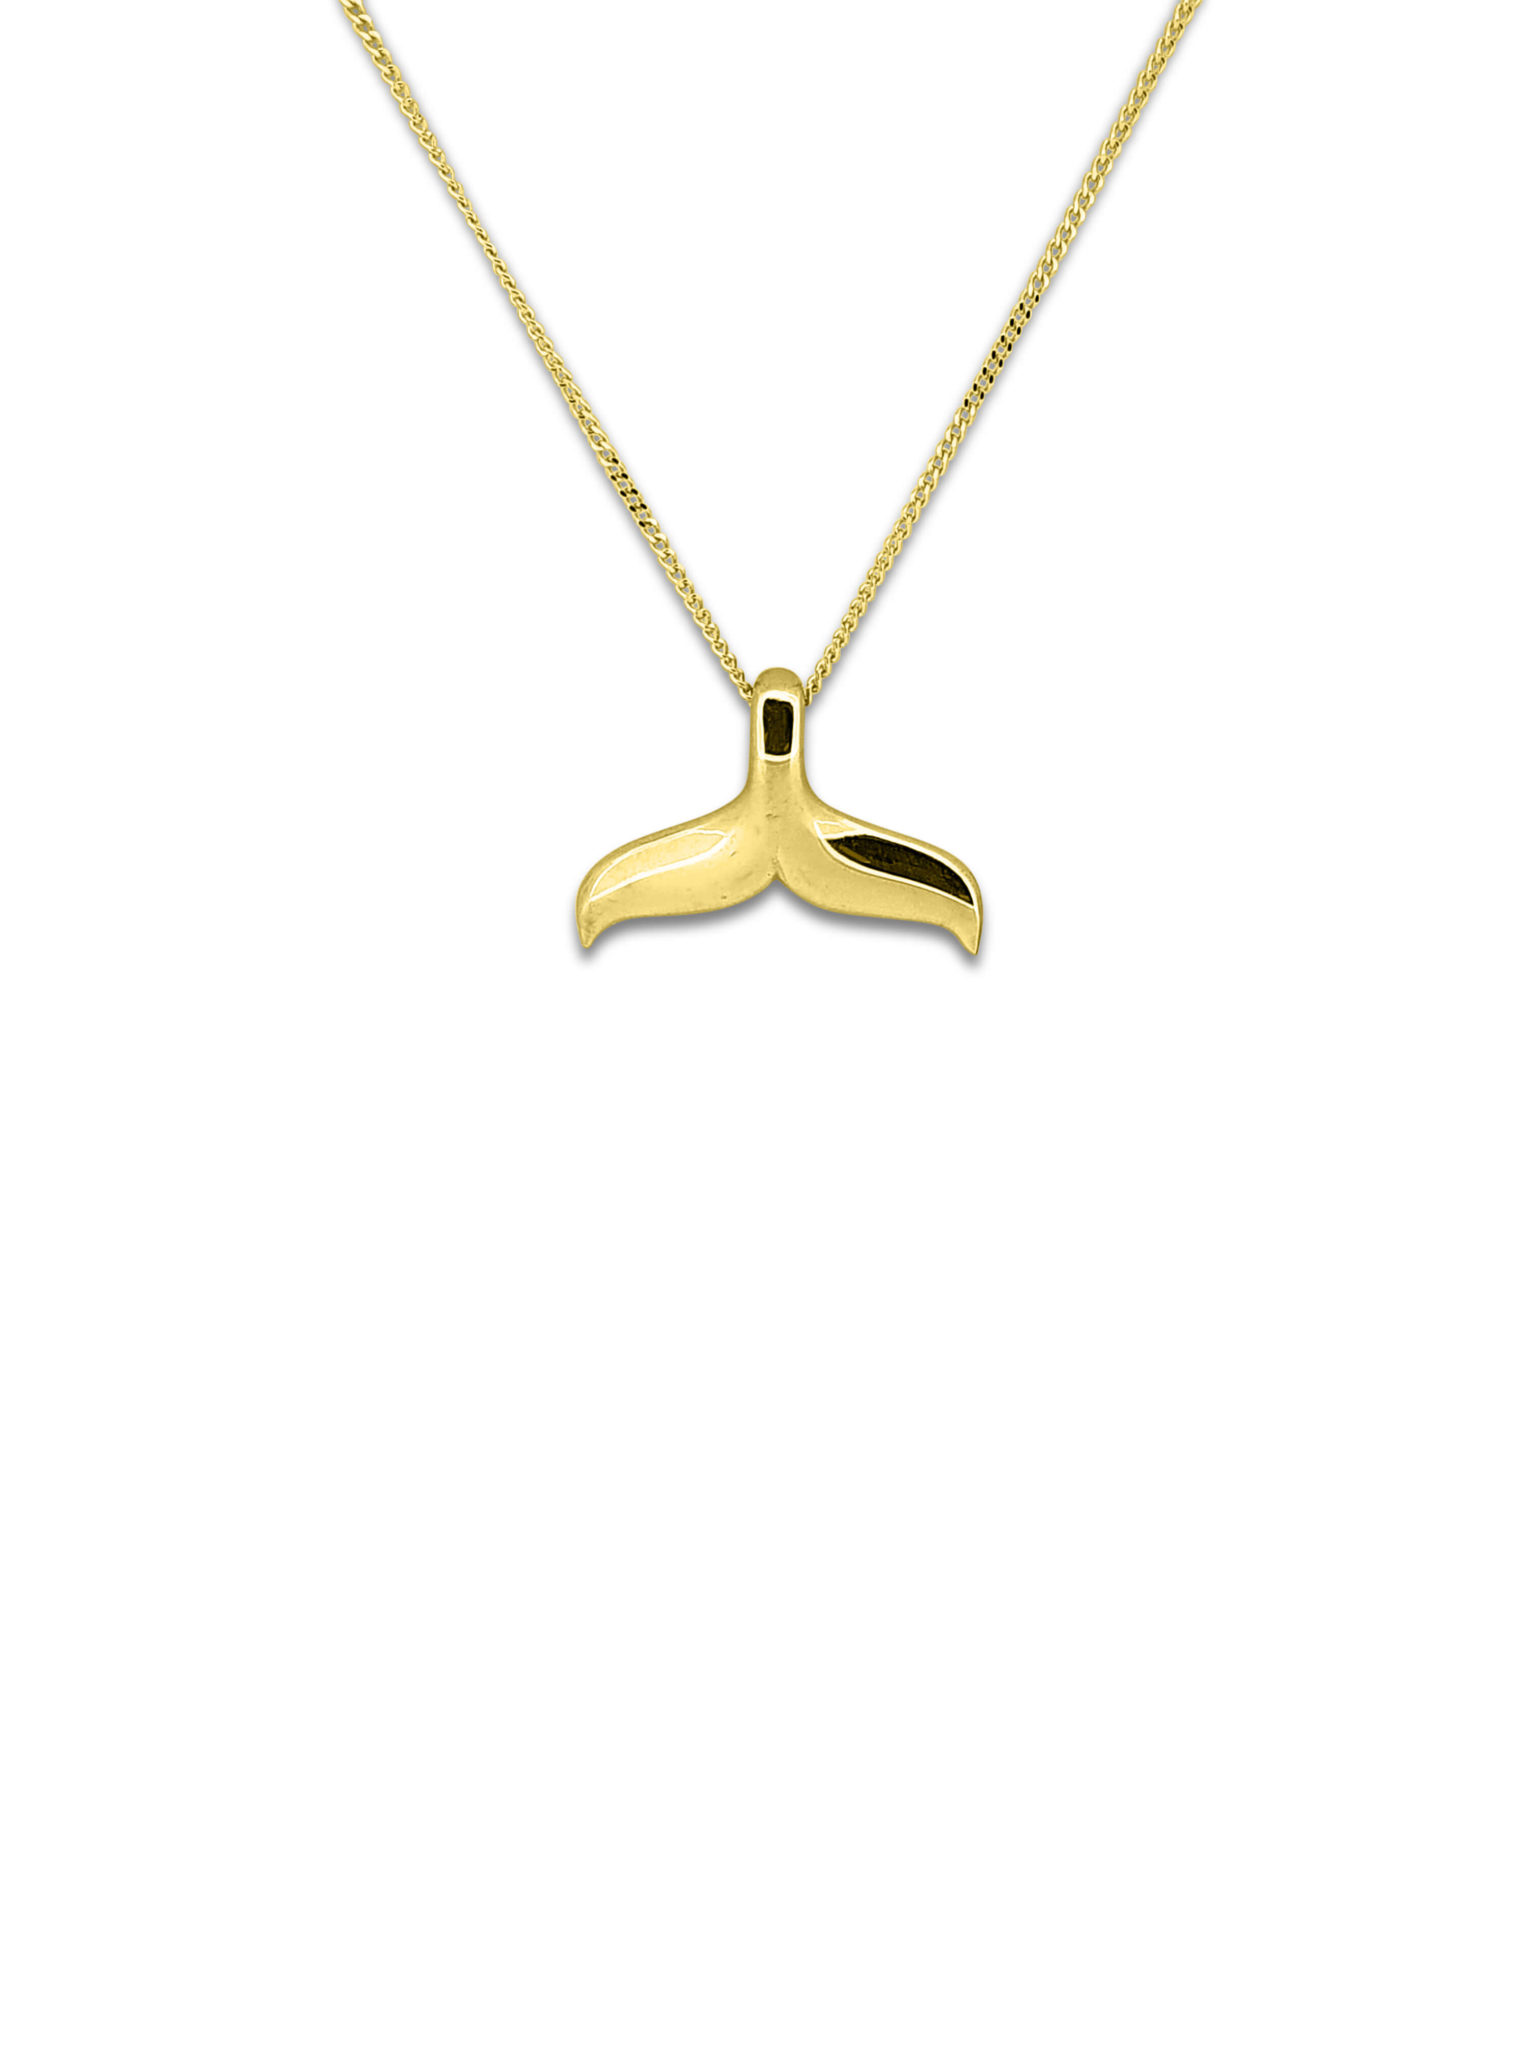 Gold Whale Tail Necklace, Whale Tail Necklace, Gold Necklace, Whale Tail  Pendant Necklace, Whale Necklace, Sea Life Necklace, Whale Pendant - Etsy | Whale  tail necklace, Whale necklace, Gold necklace